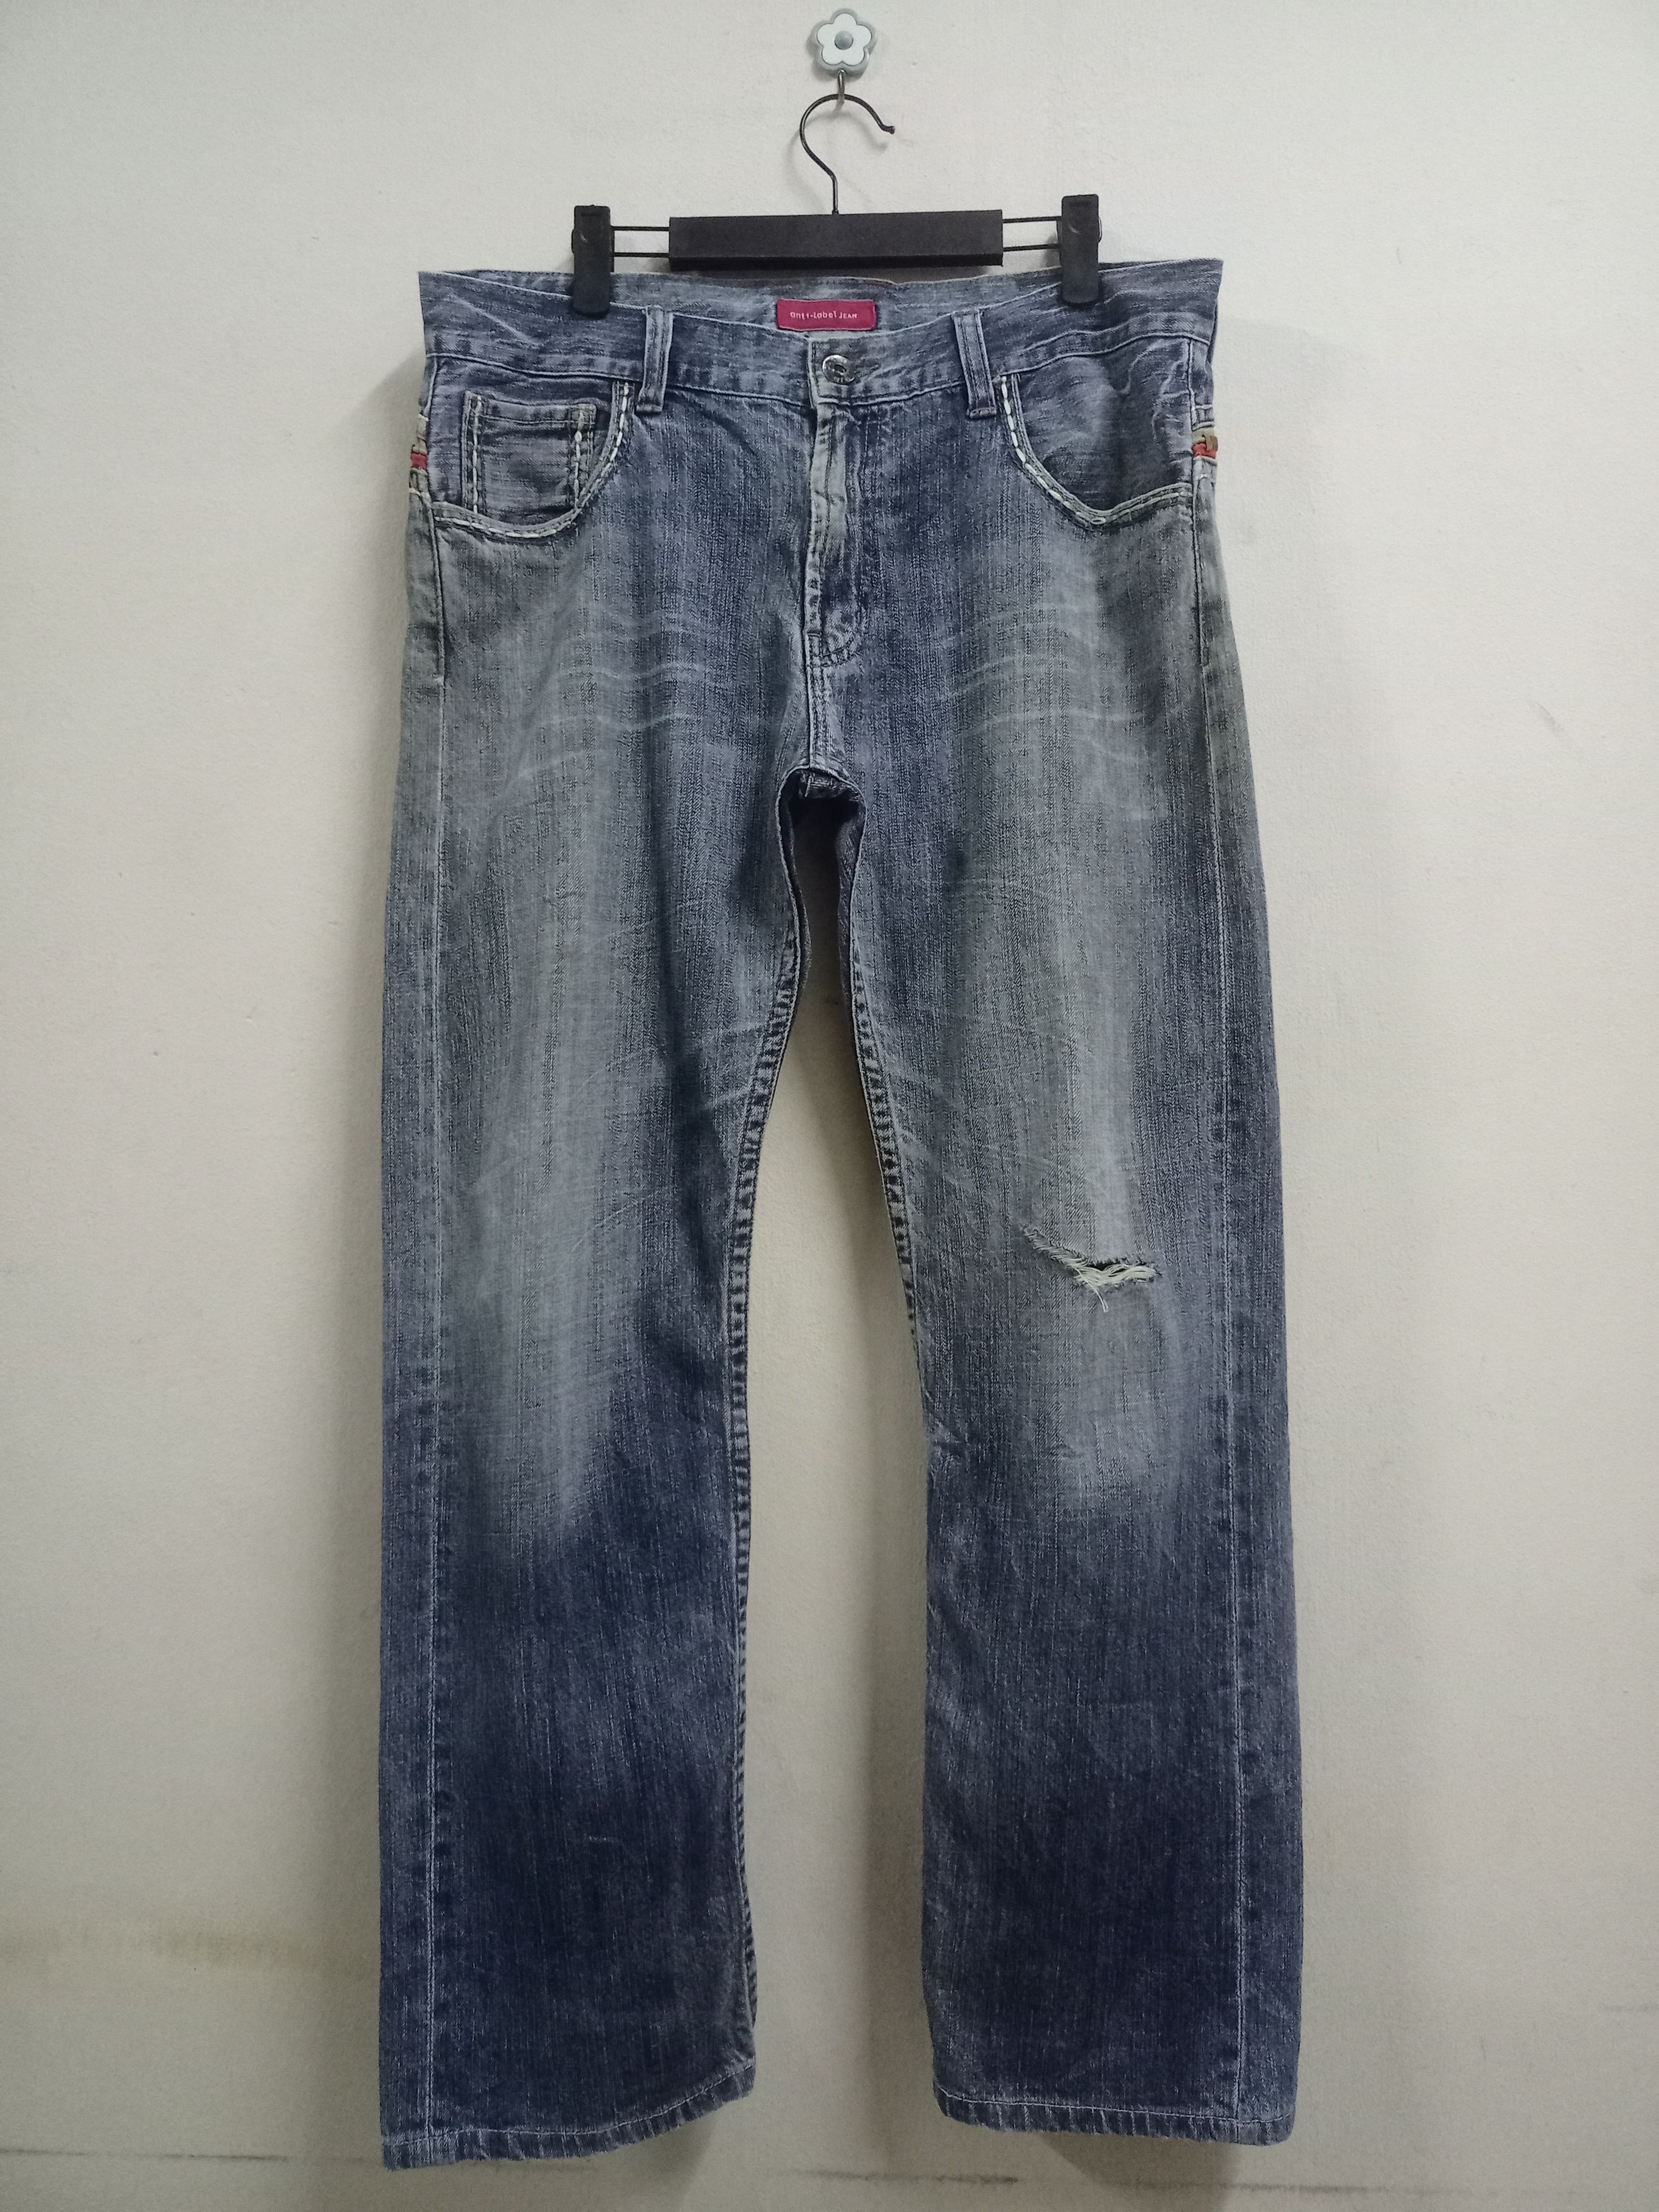 Distressed Denim Vintage Anti Label Blue Wash Distressed Baggy Jeans 35x29 Size US 35 - 1 Preview